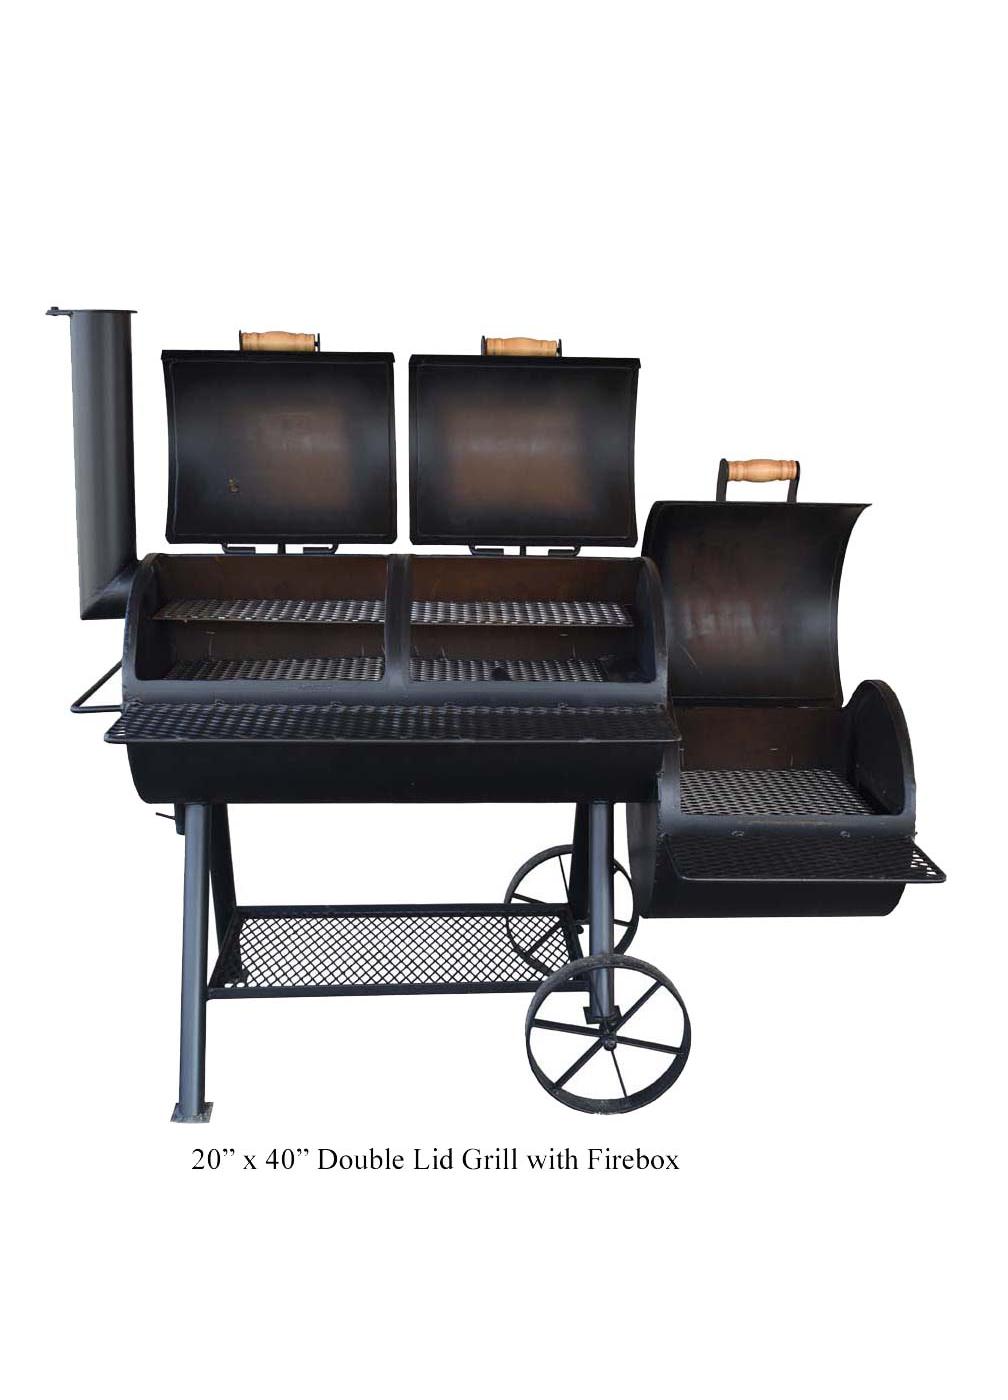 Lyfe Tyme Double Lid Grill with Firebox; image 2 of 2